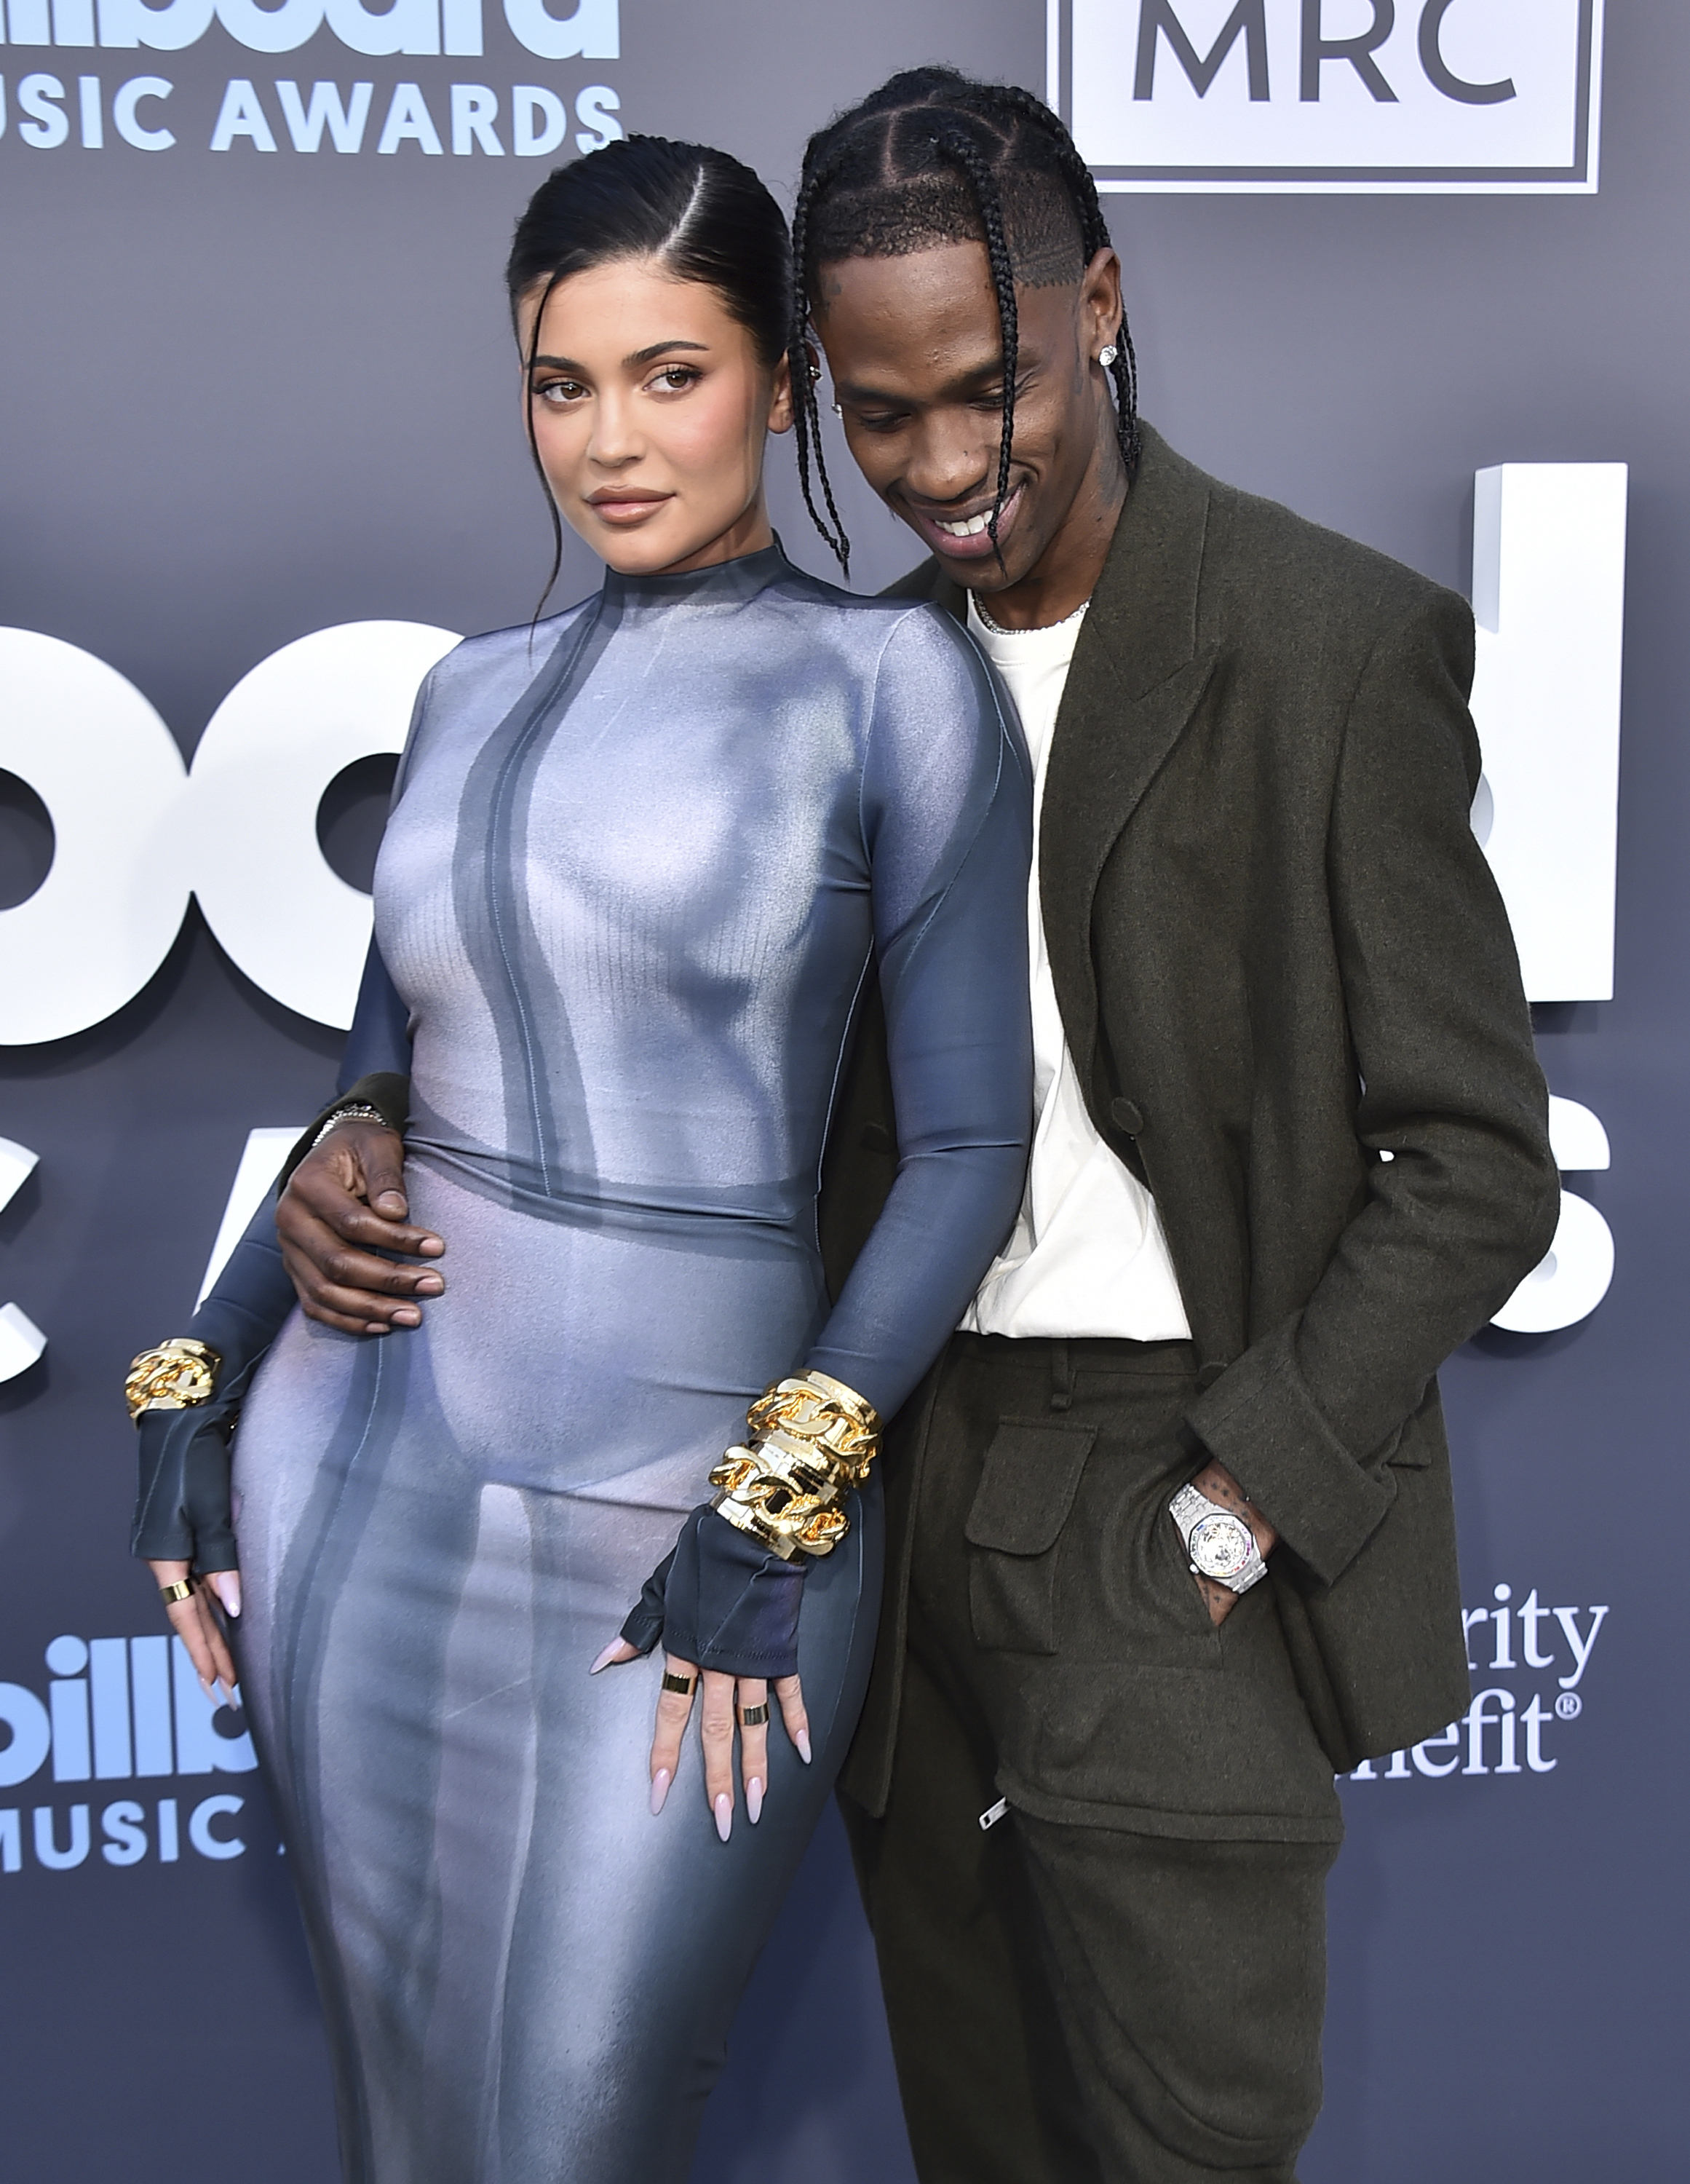 Kylie Jenner, left, and Travis Scott arrive at the Billboard Music Awards on Sunday, May 15, 2022, at the MGM Grand Garden Arena in Las Vegas